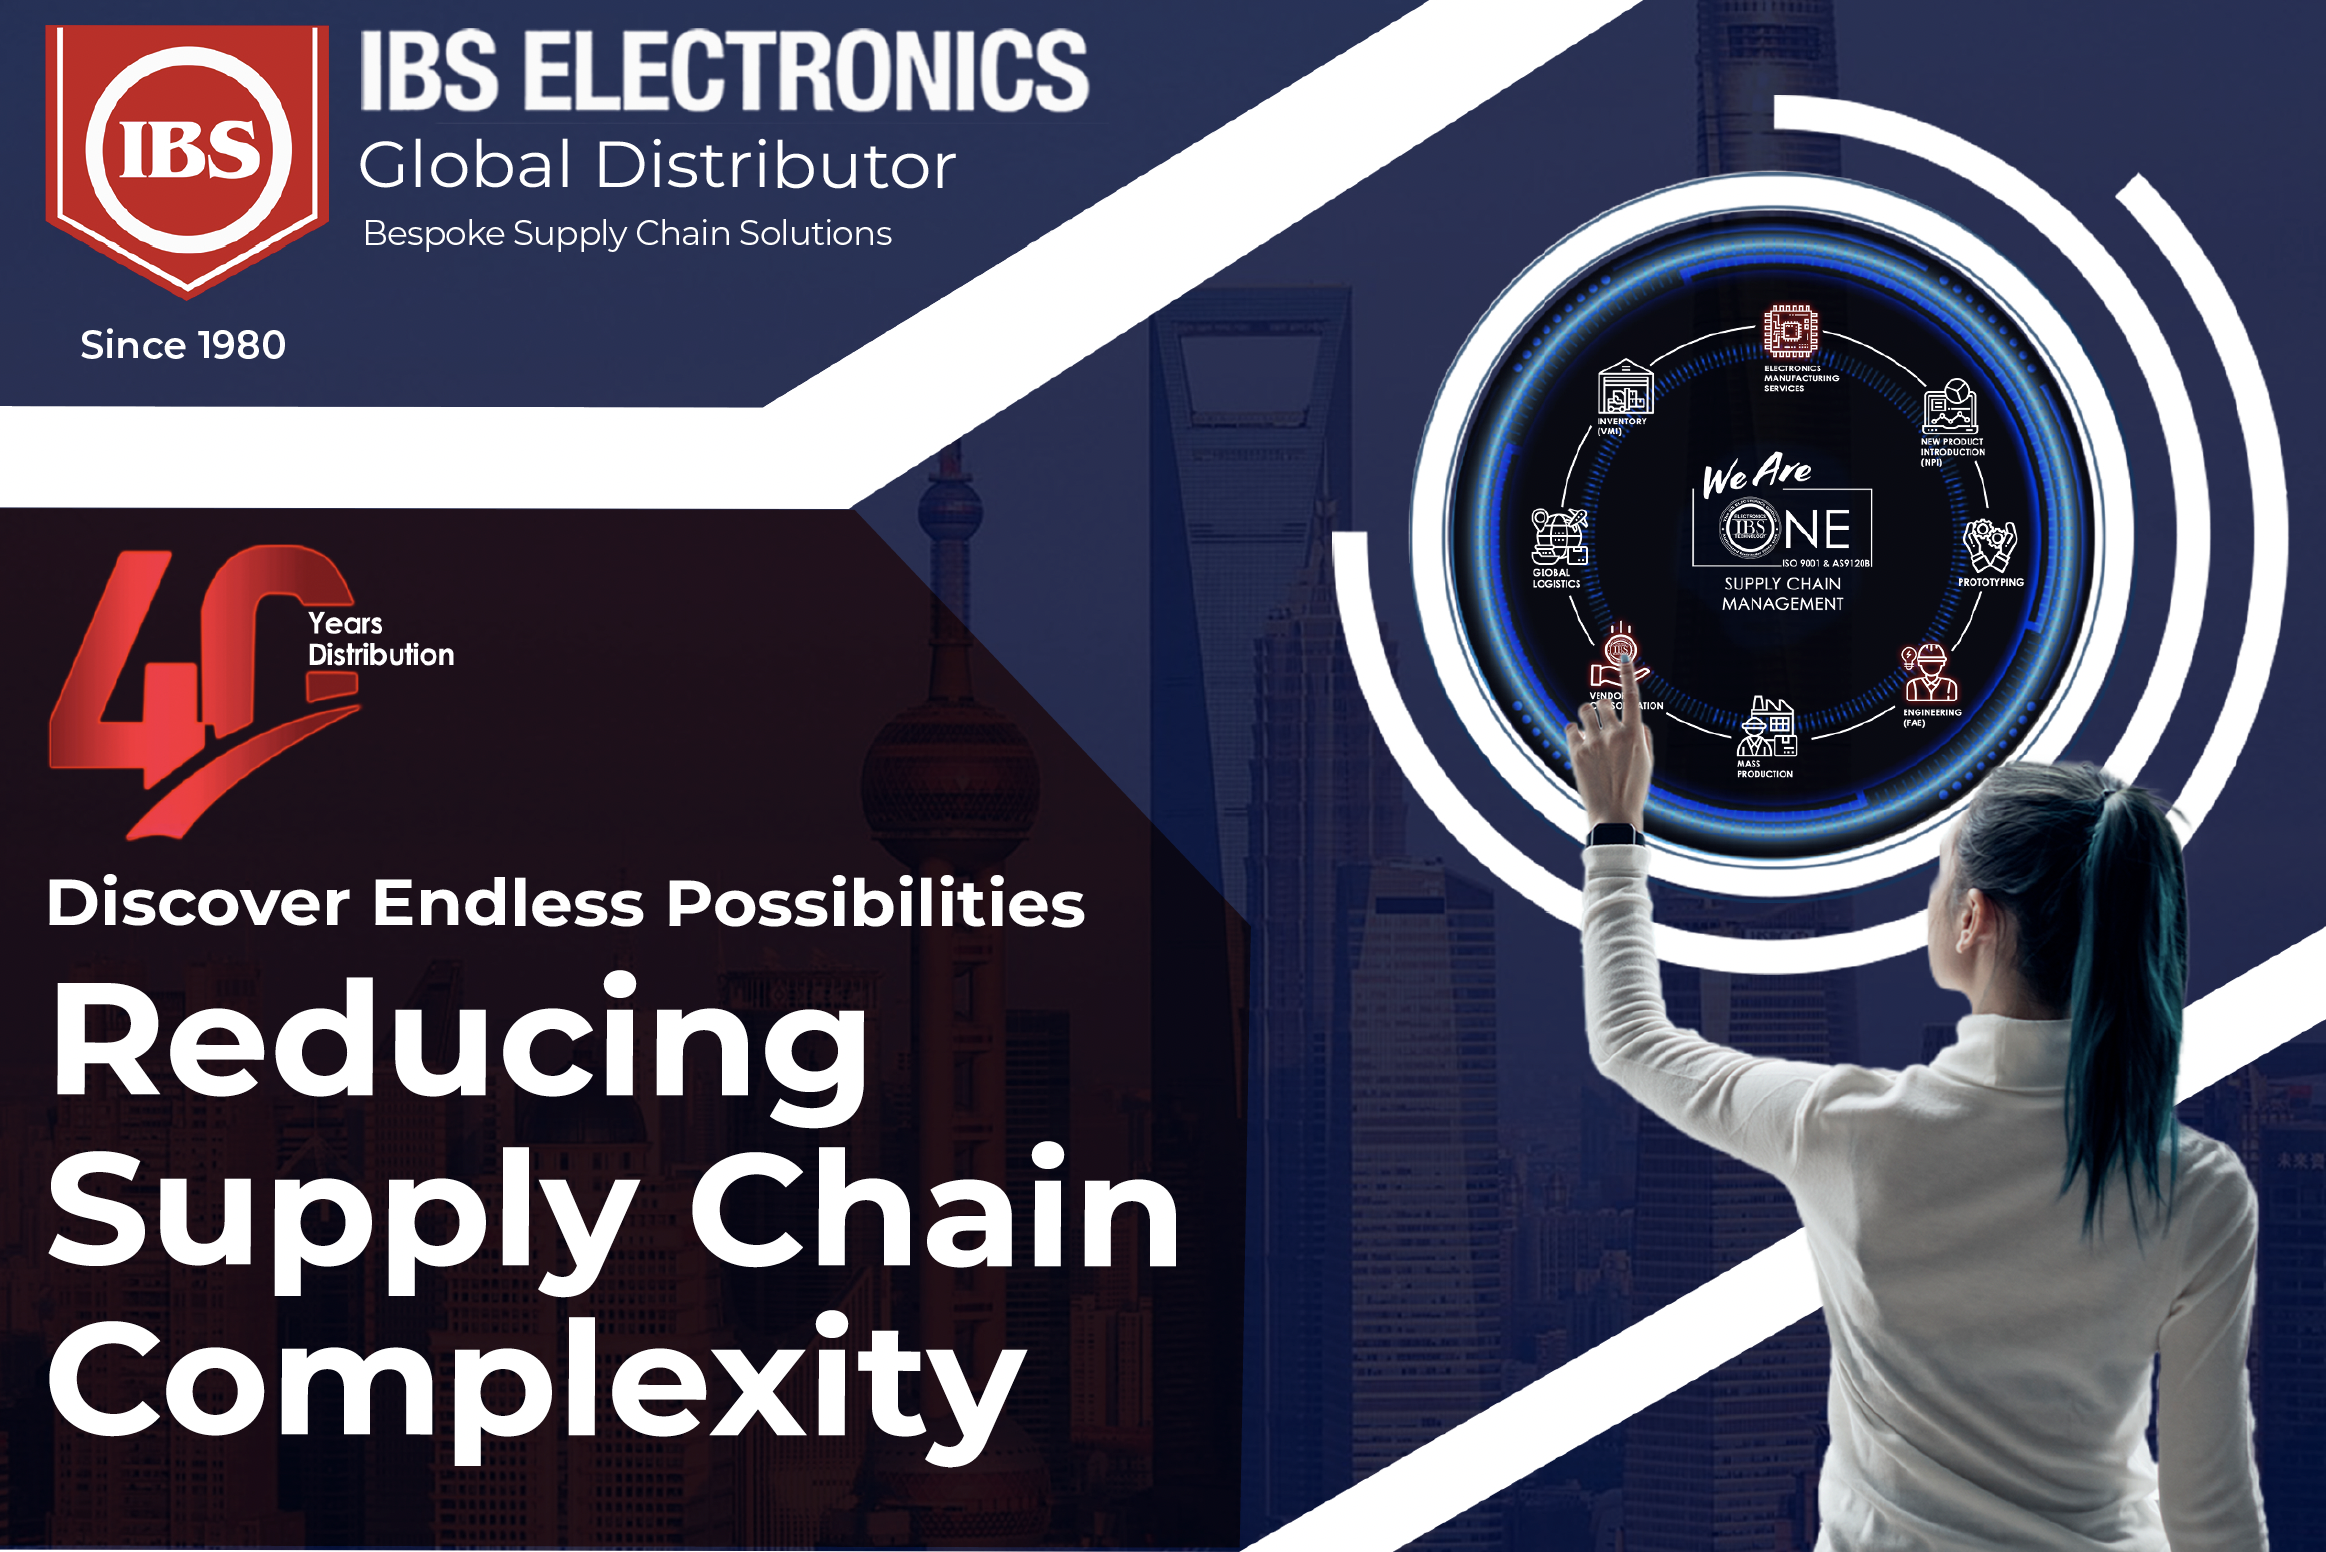 IBS Electronics 40 years of Reducing Supply Chain Complexity.